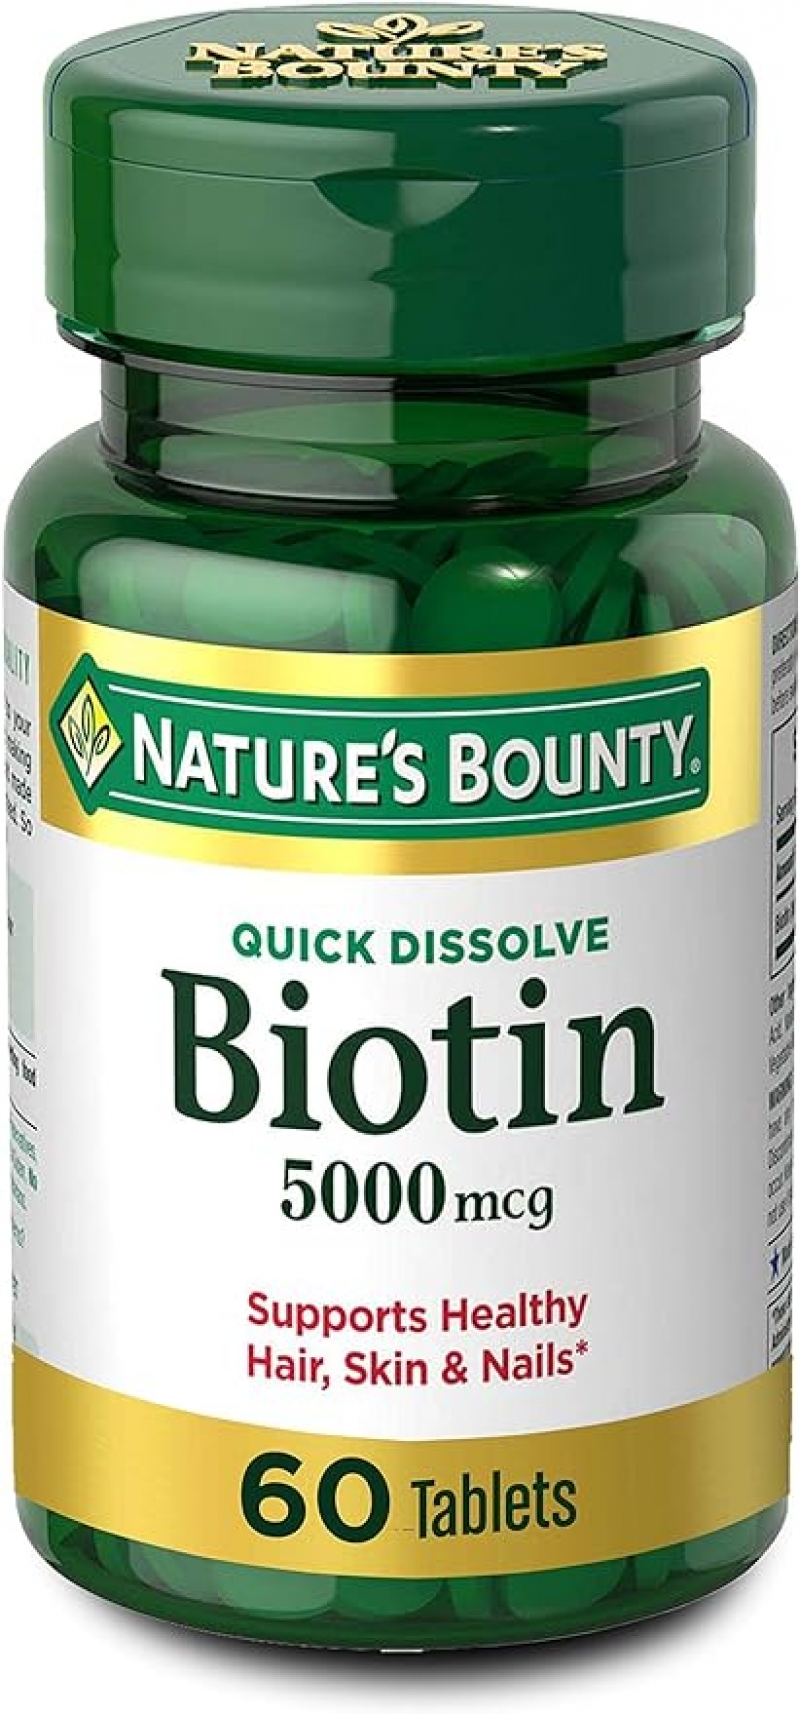 ihocon: Nature's Bounty Biotin, Vitamin Supplement, Supports Metabolism for Cellular Energy and Healthy Hair, Skin, and Nails 生物素 5000 mcg, 60 Quick Dissolve